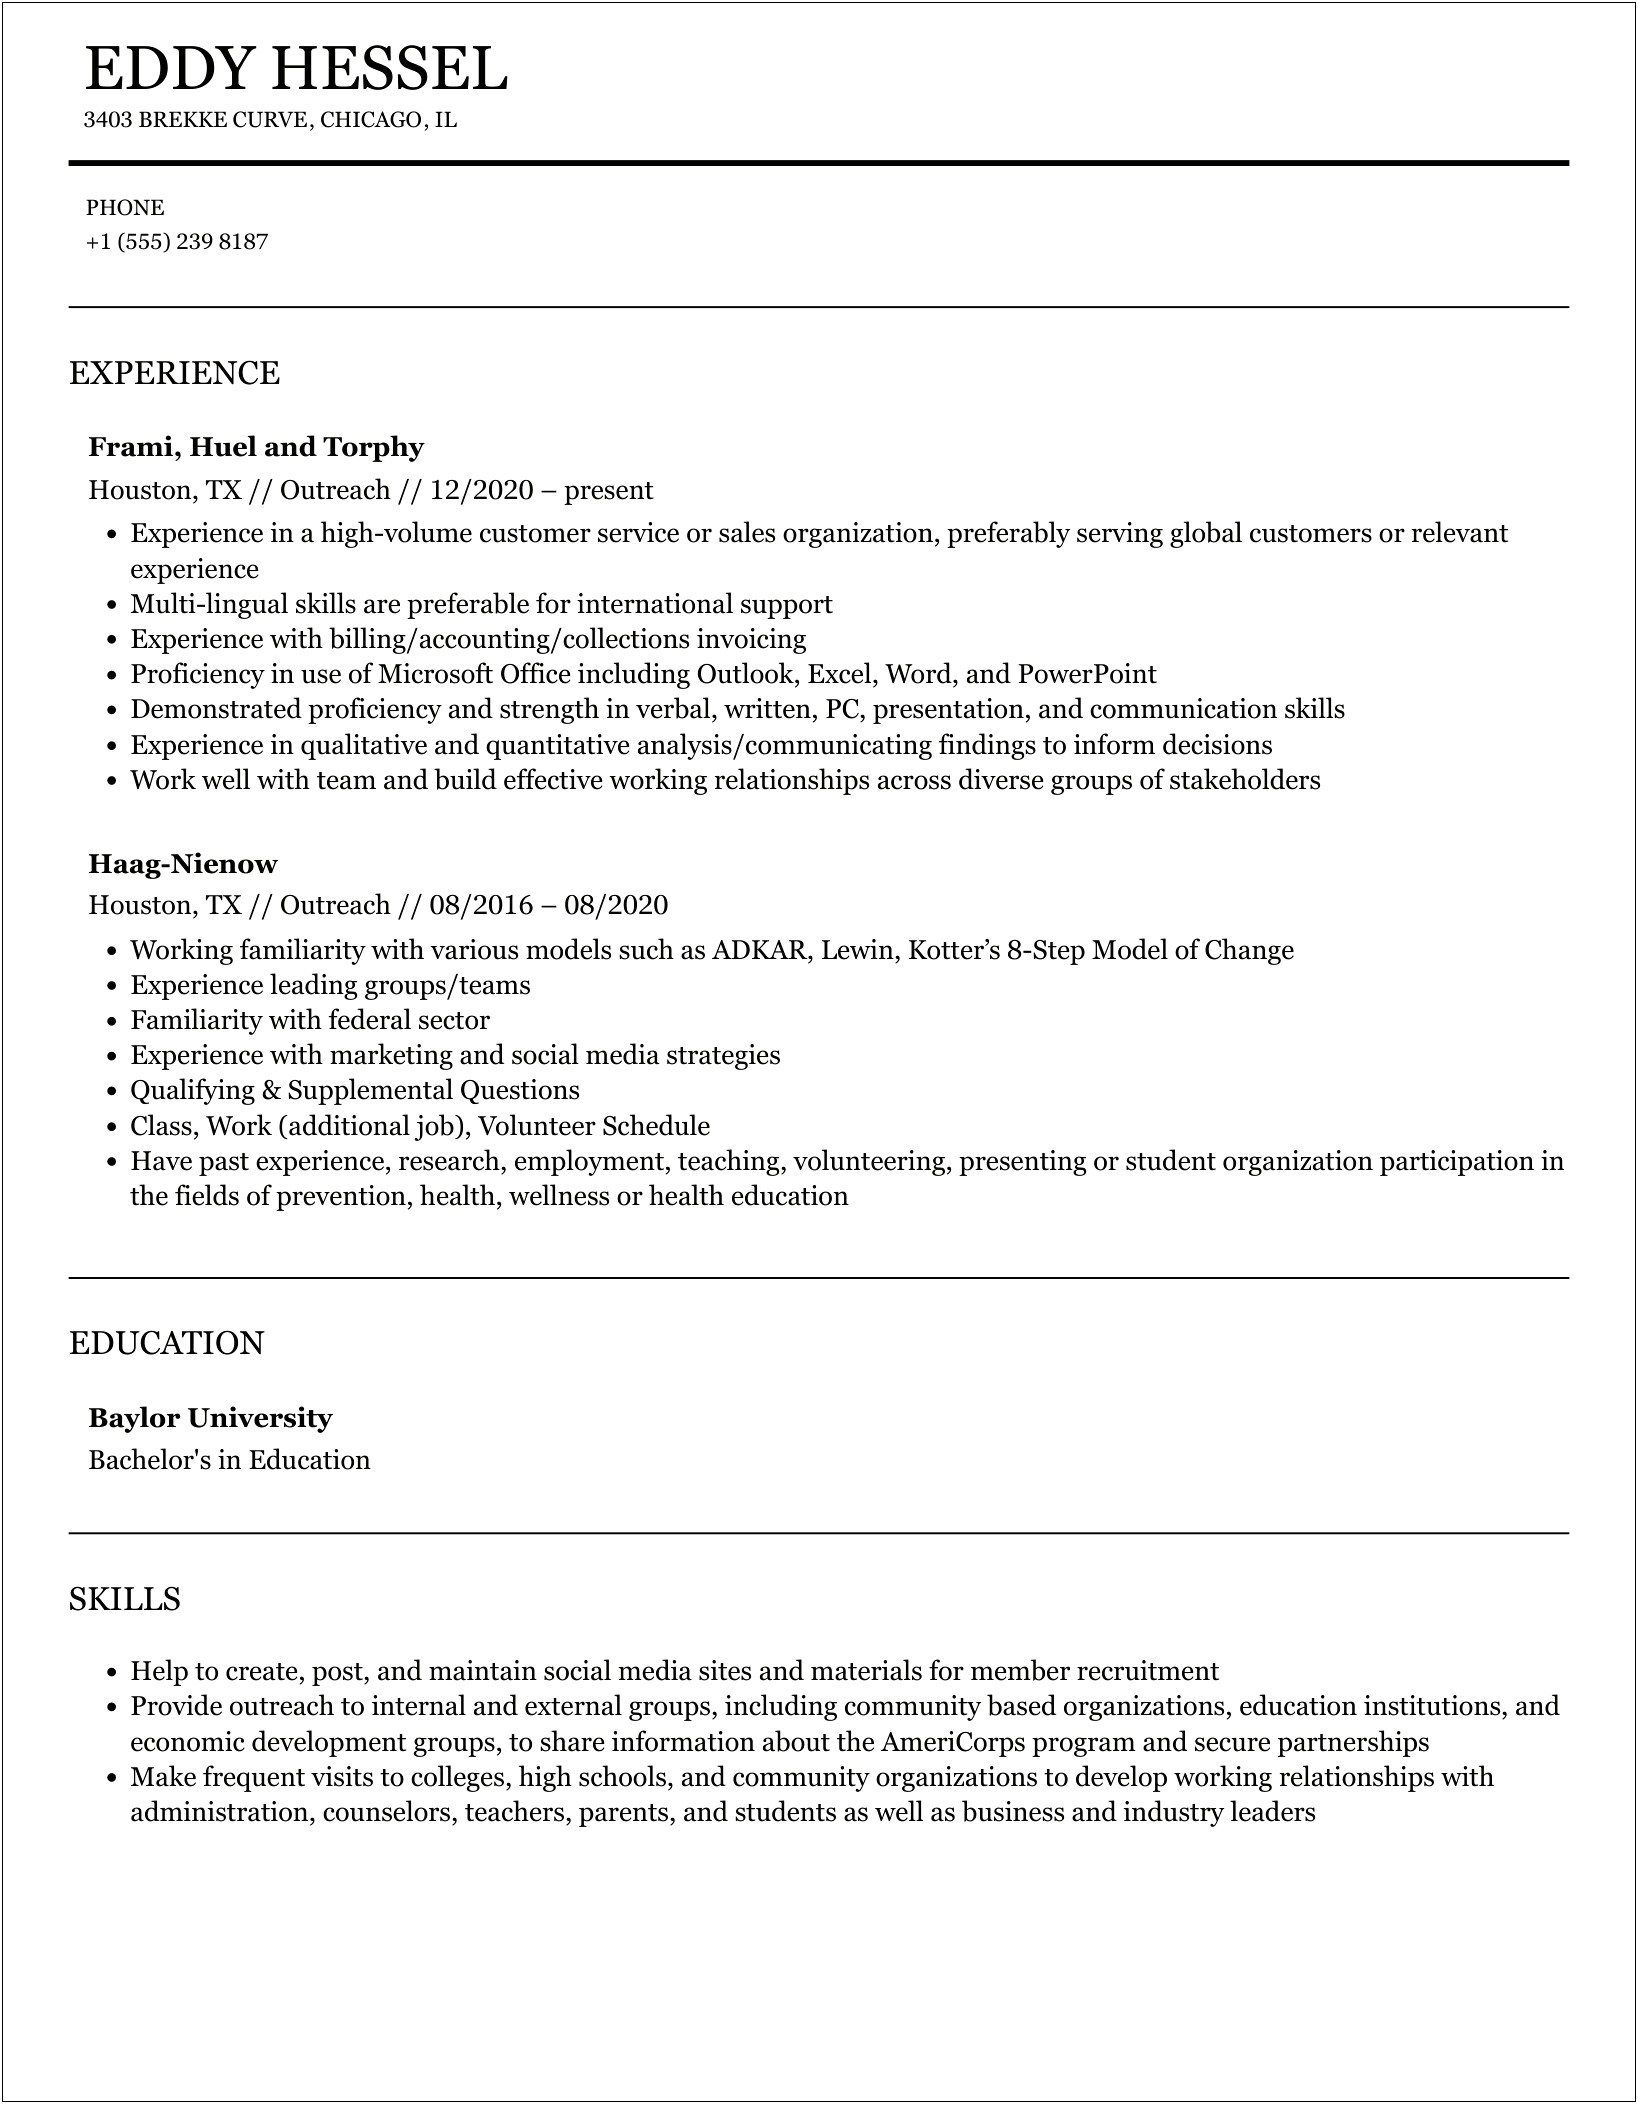 Resume For Americorps Job In An Elementary School